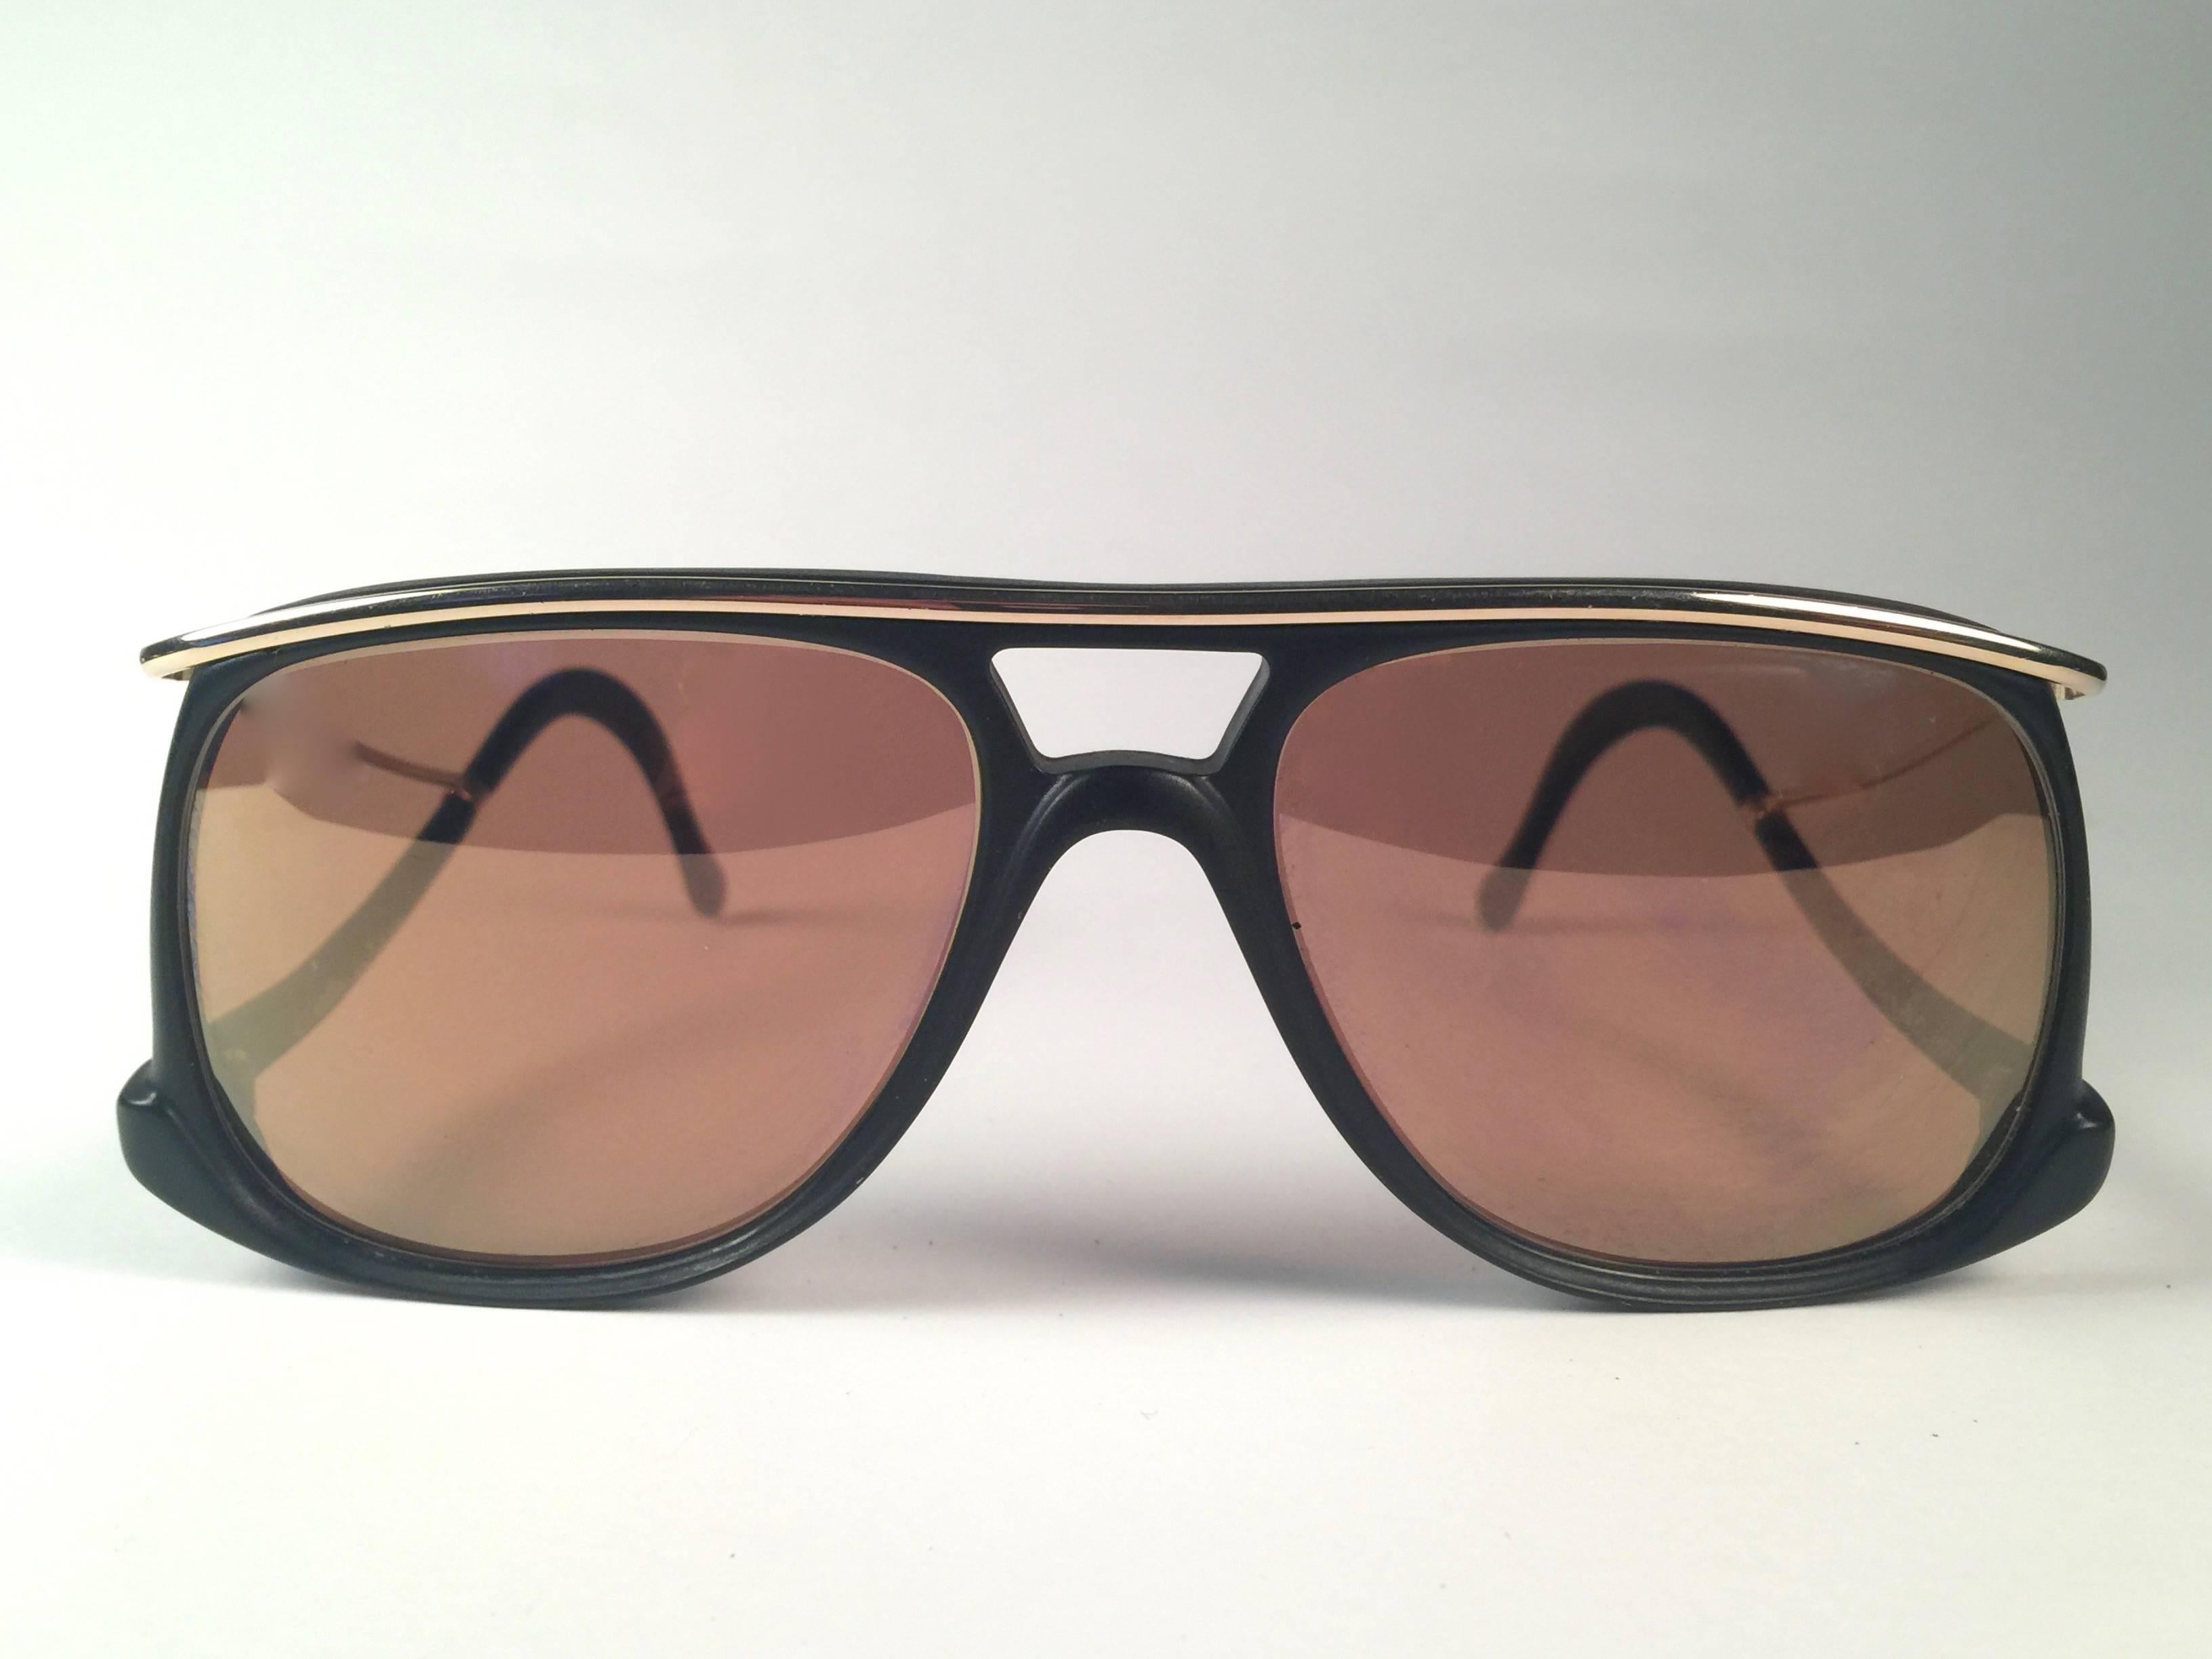 New Vintage Colani Design black matte with gold accents sunglasses. Cut out frame sporting a pair of gold mirror lenses.

Never worn or displayed. This item may show minor sign of wear due to nearly 40 years of storage.

Designed and produced in